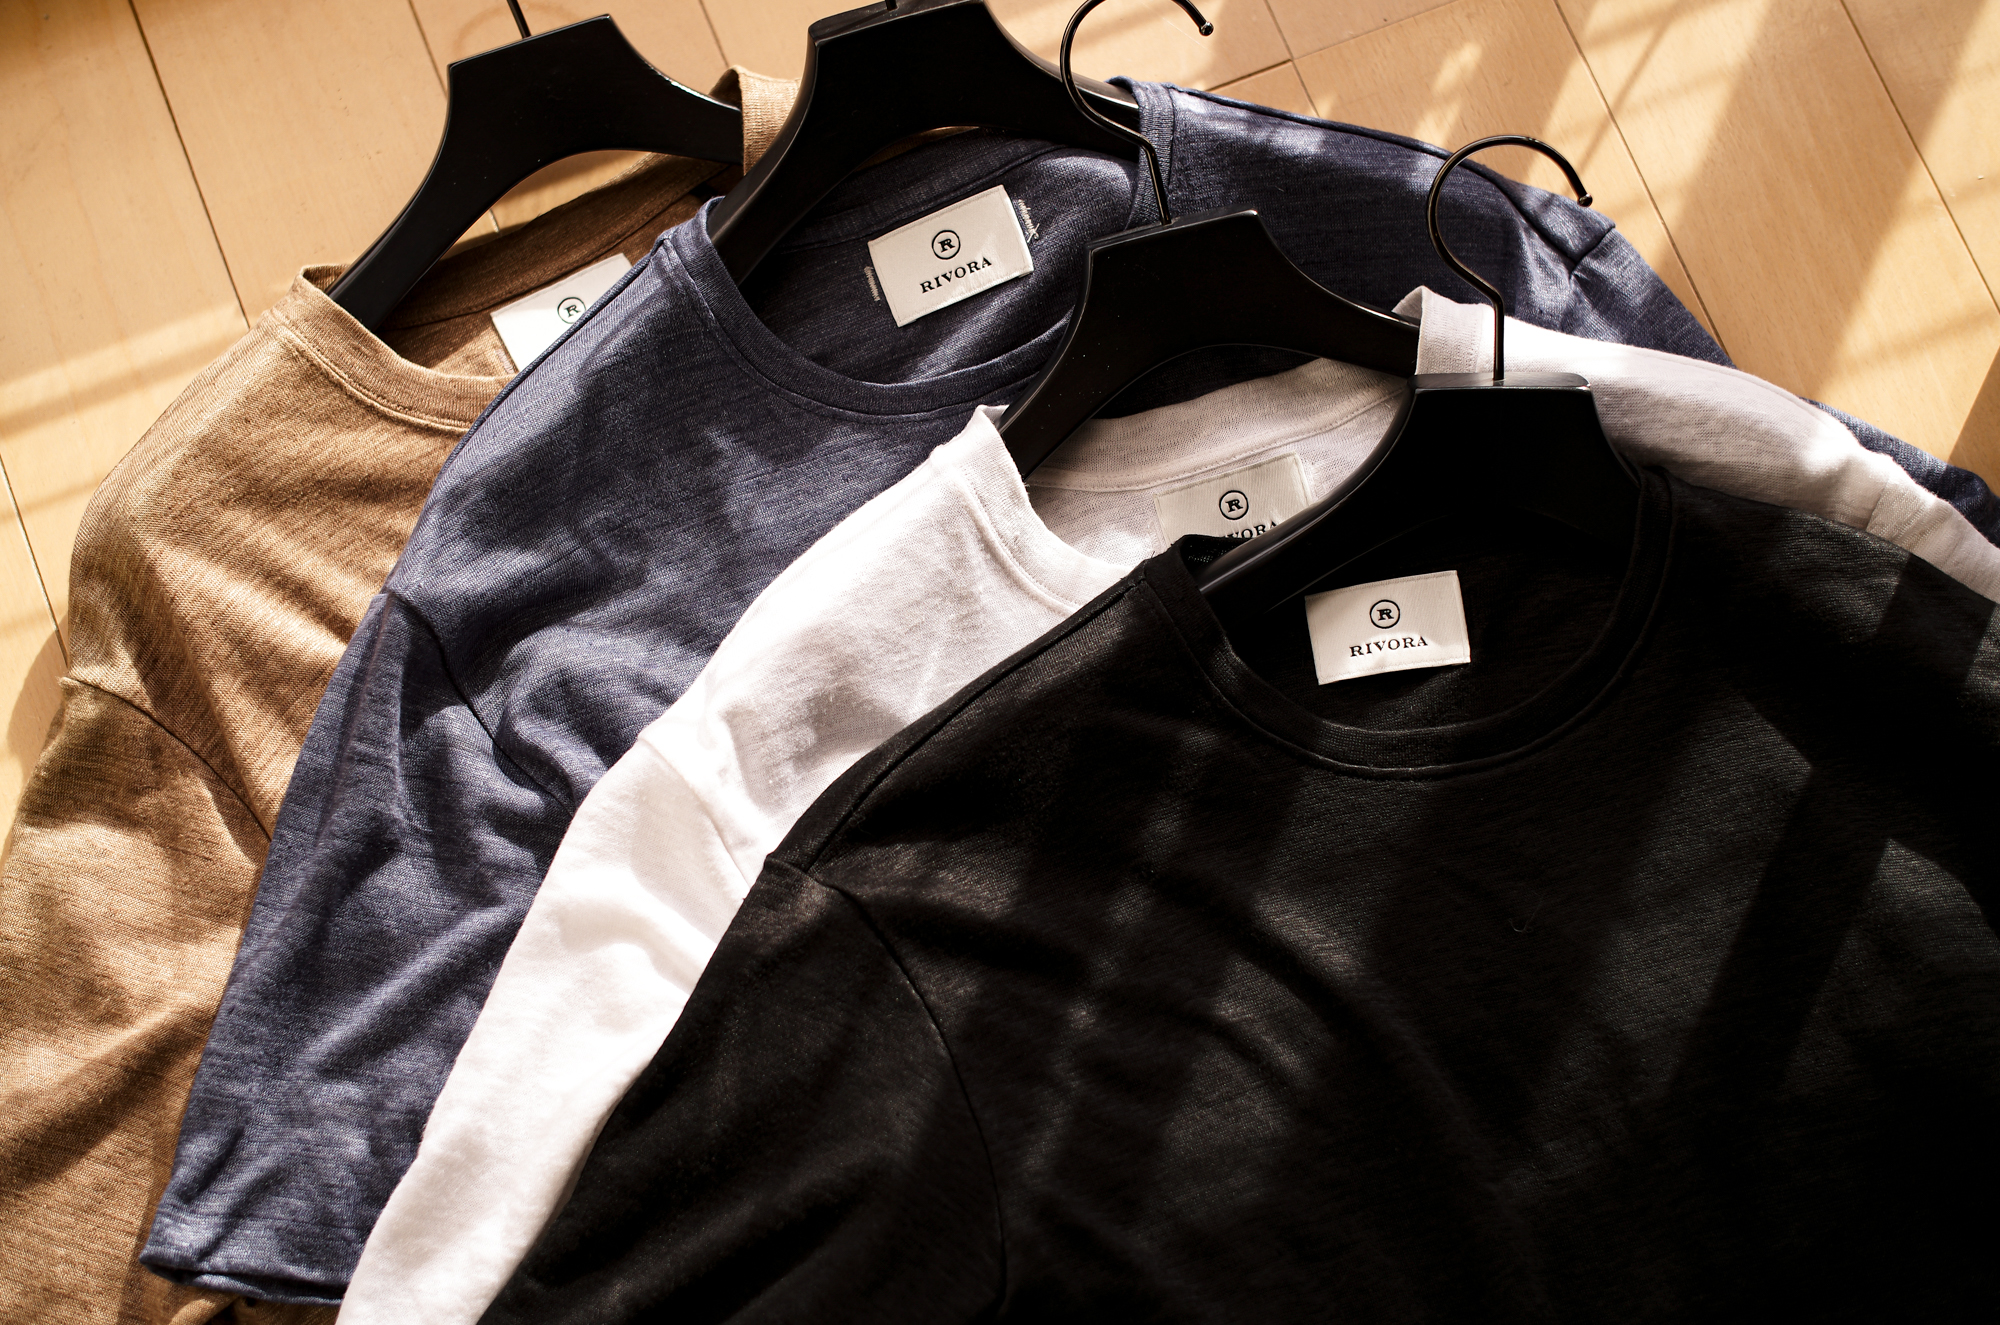 RIVORA (リヴォラ) Vintage Linen Layered T-Shirts ヴィンテージ リネン レイヤード Tシャツ Taupe(081),Blue Grey(052),White(030),Black(010)   MADE IN JAPAN (日本製) 2024 春夏 【ご予約開始】愛知 名古屋 Alto e Diritto altoediritto アルトエデリット